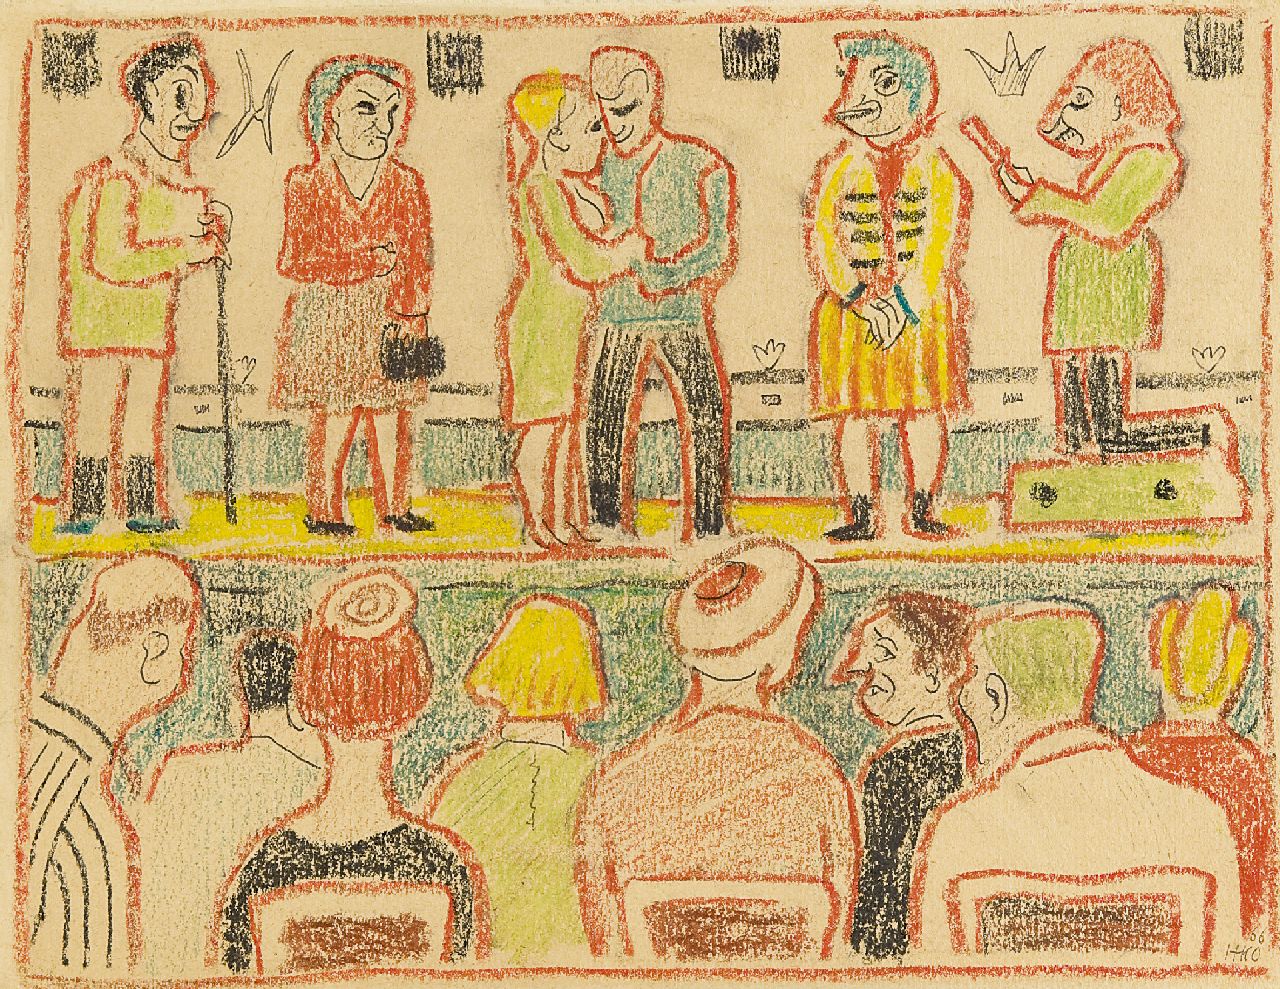 Kamerlingh Onnes H.H.  | 'Harm' Henrick Kamerlingh Onnes | Watercolours and drawings offered for sale | The theater performance, chalk on paper 23.6 x 30.6 cm, signed l.r. with mon. and executed '66